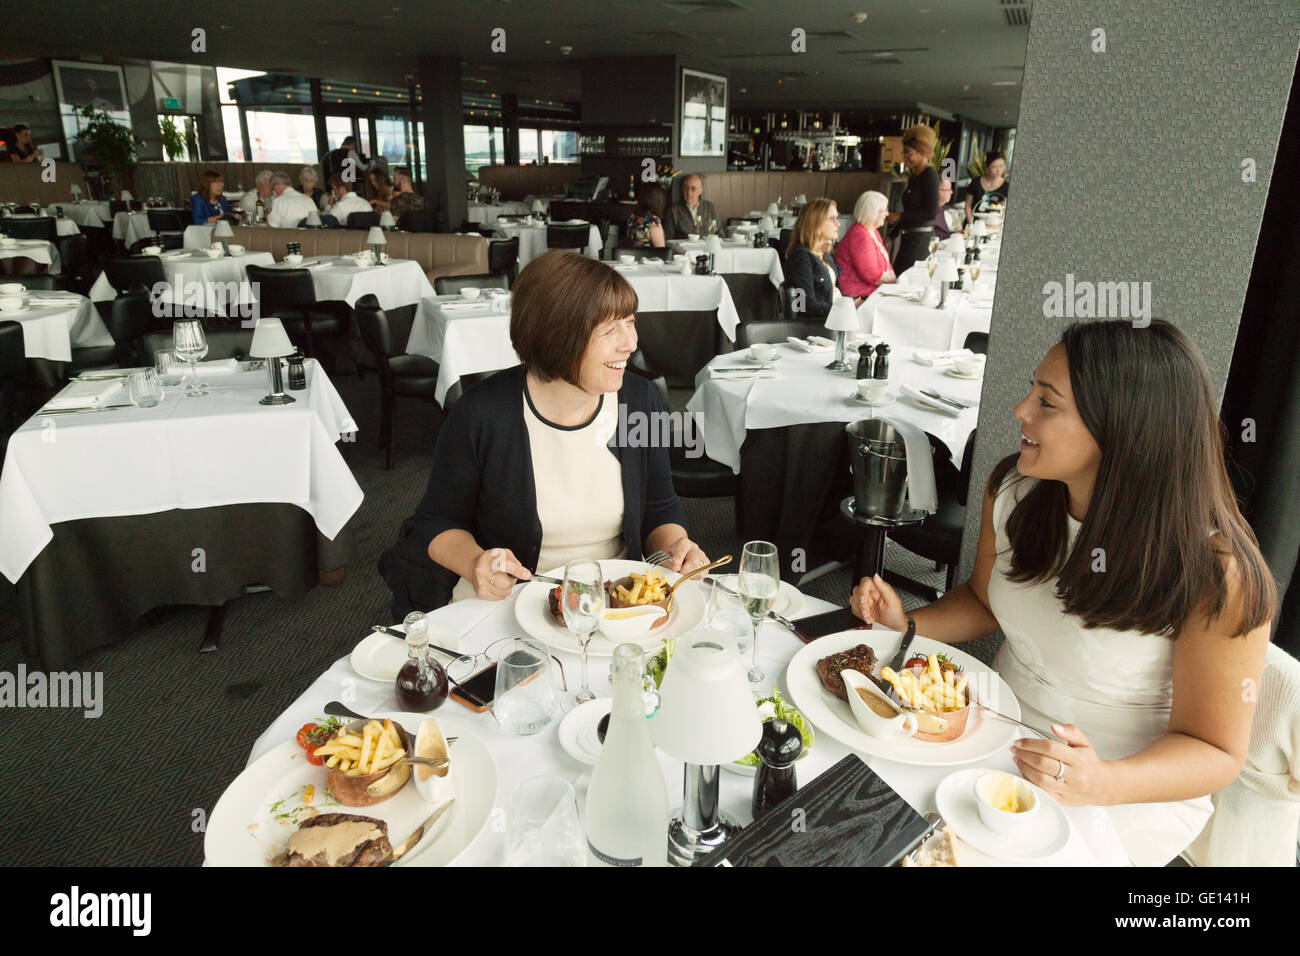 Restaurant two people eating; Two women eating a meal, interior, Marco Pierre White Steakhouse restaurant,  Birmingham UK Stock Photo